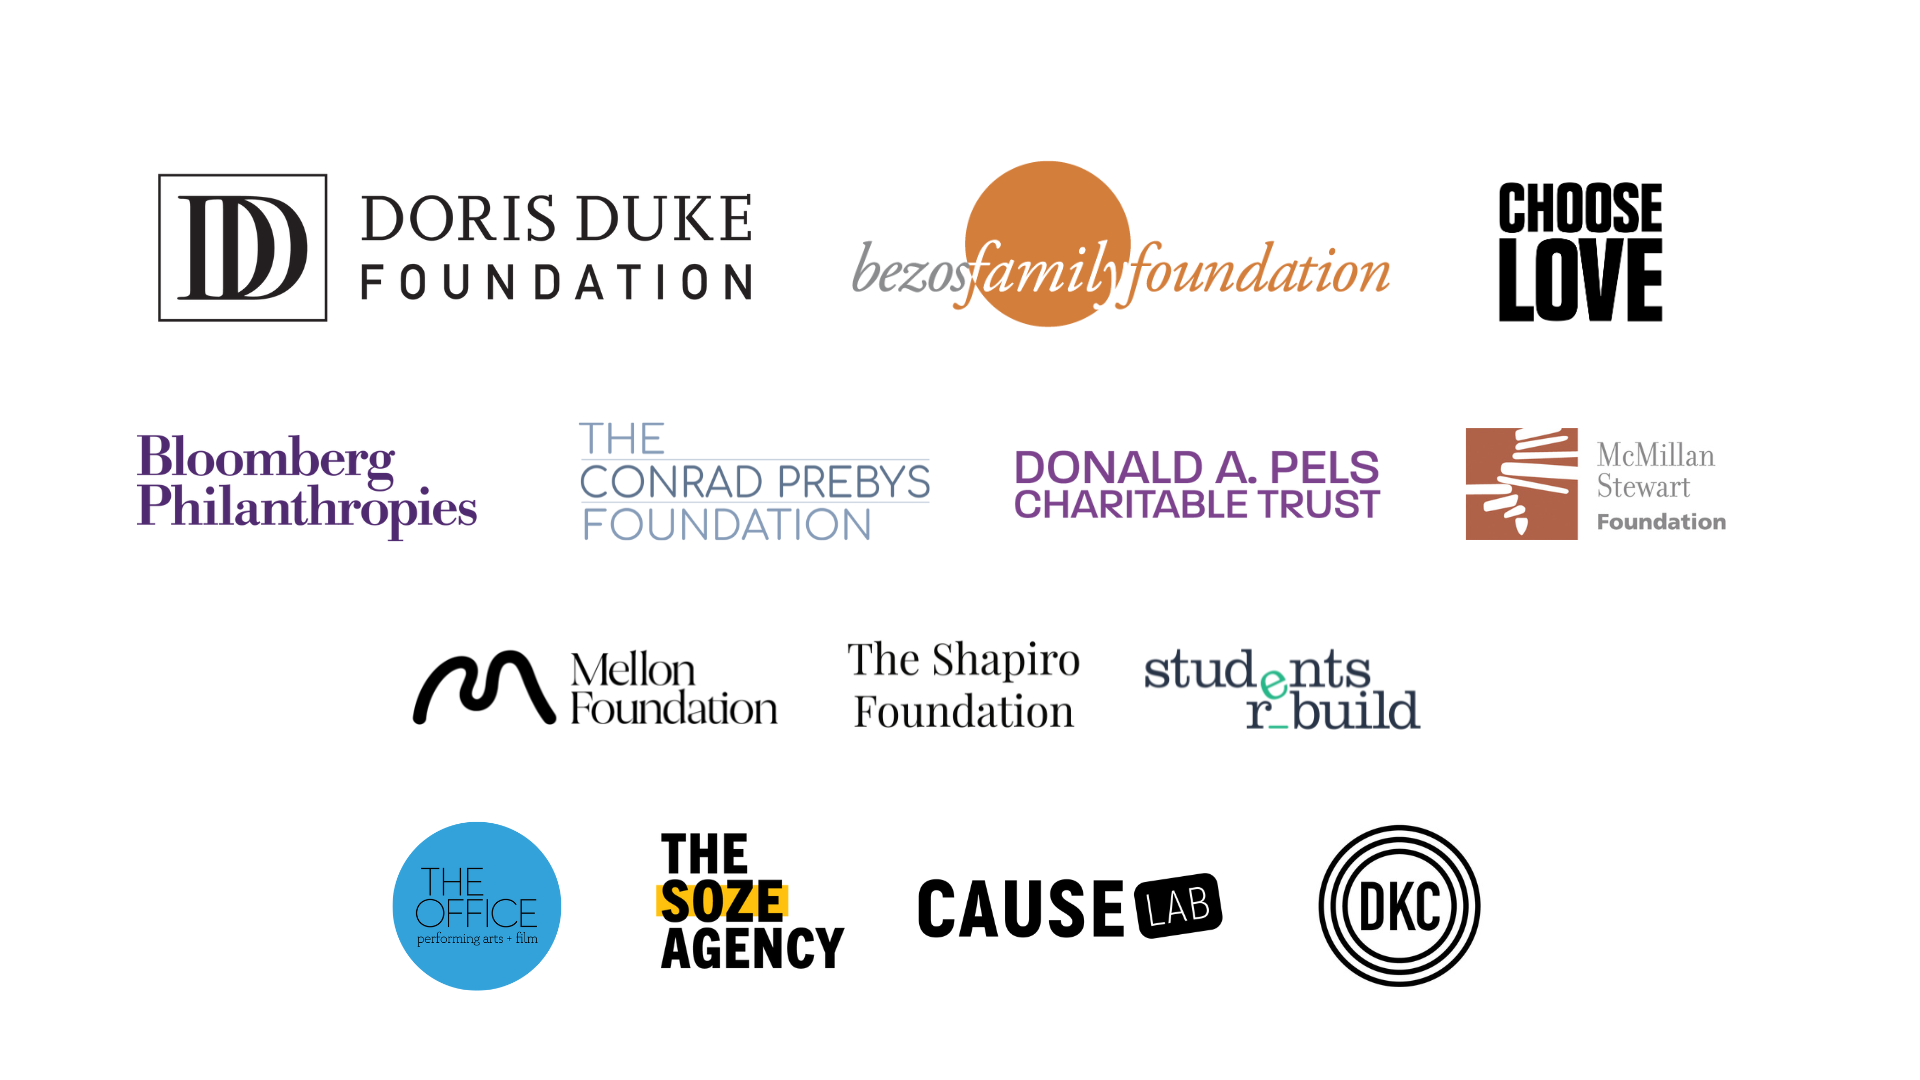 Many logos for foundations and organizations